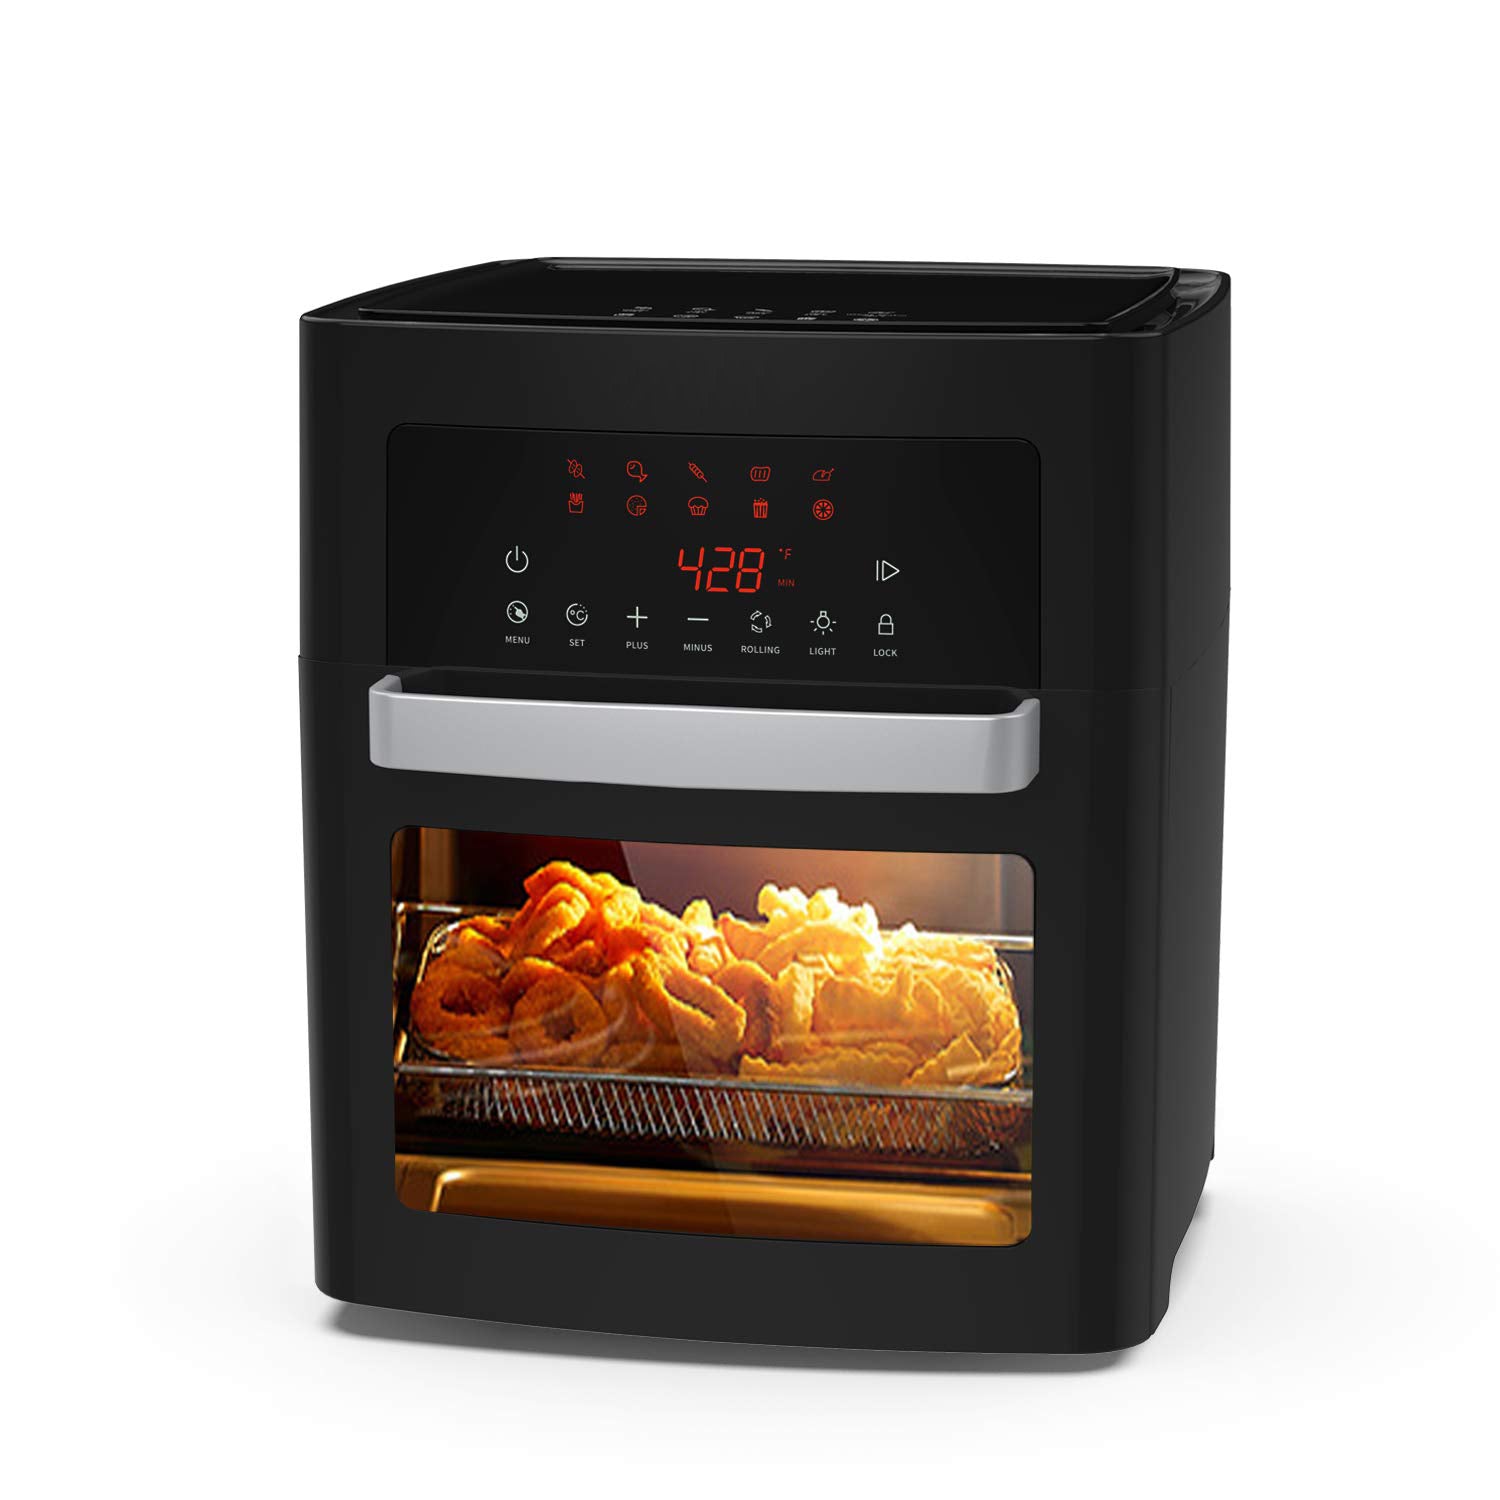 Air-Fryer,-16-Quarts-XL-Size,-Smart-Cook-Presets-with-LED-Digital-Touchscreen-Rotisserie-Oven,-Countertop-Oven-with-Convection&Temp,-Freidora-de-Aire-with-Dishwasher-Safe-Accessory,-Black-kitchen-appliance